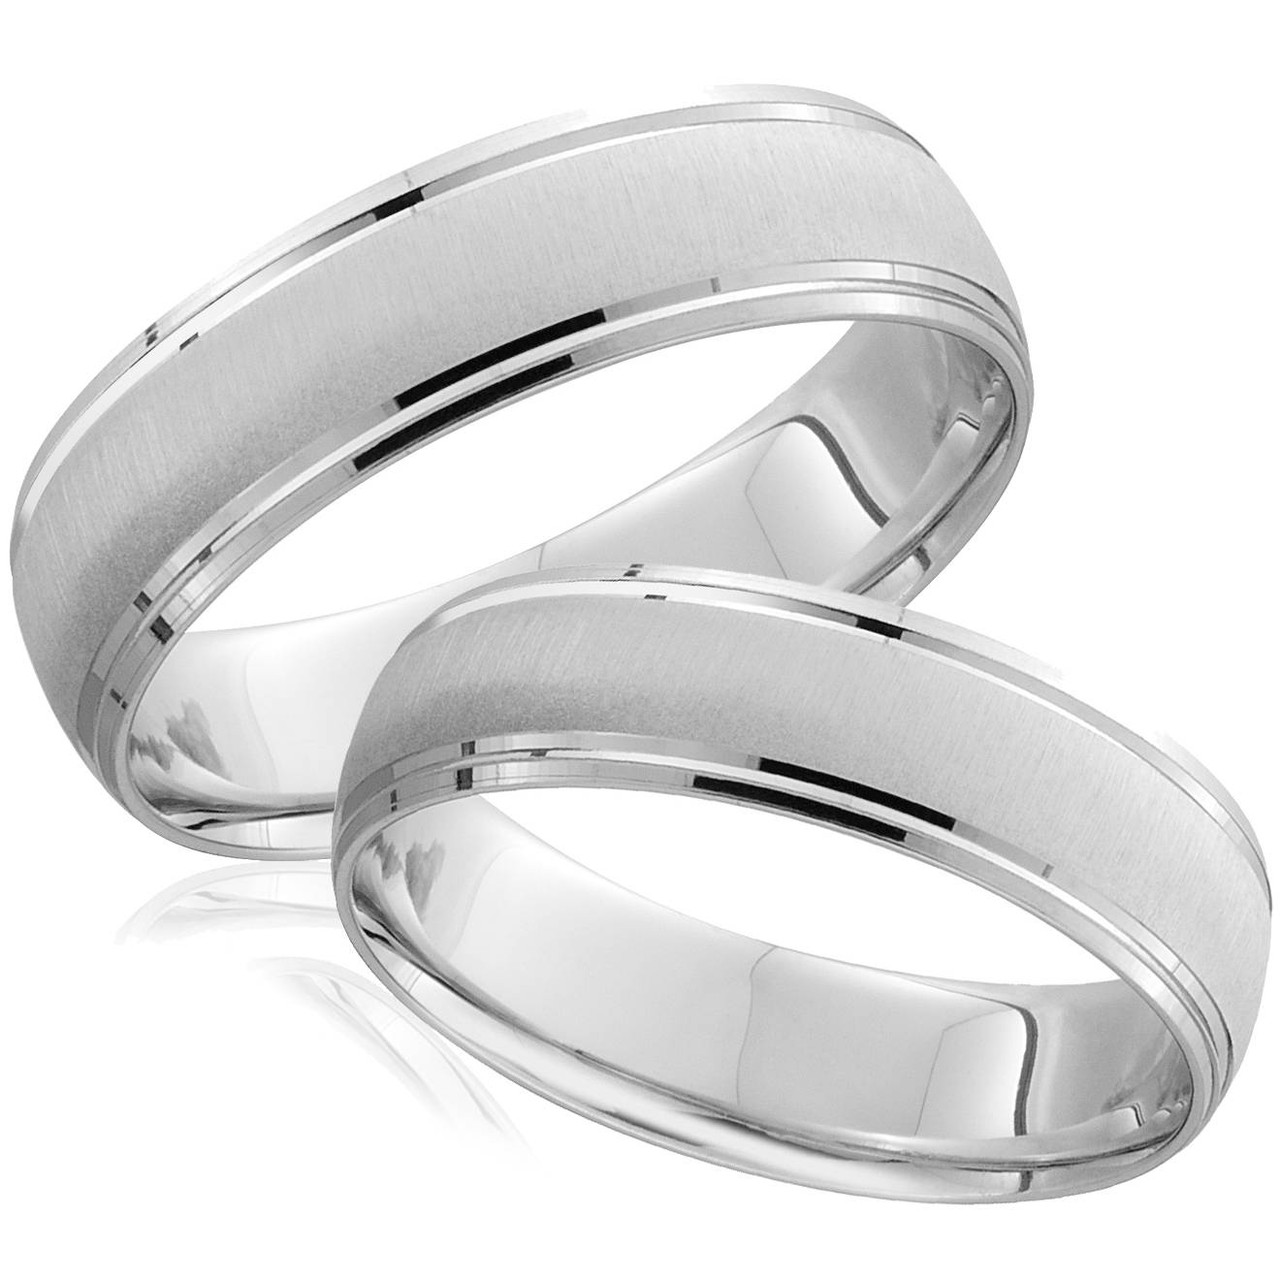 Matching wedding bands with enamel